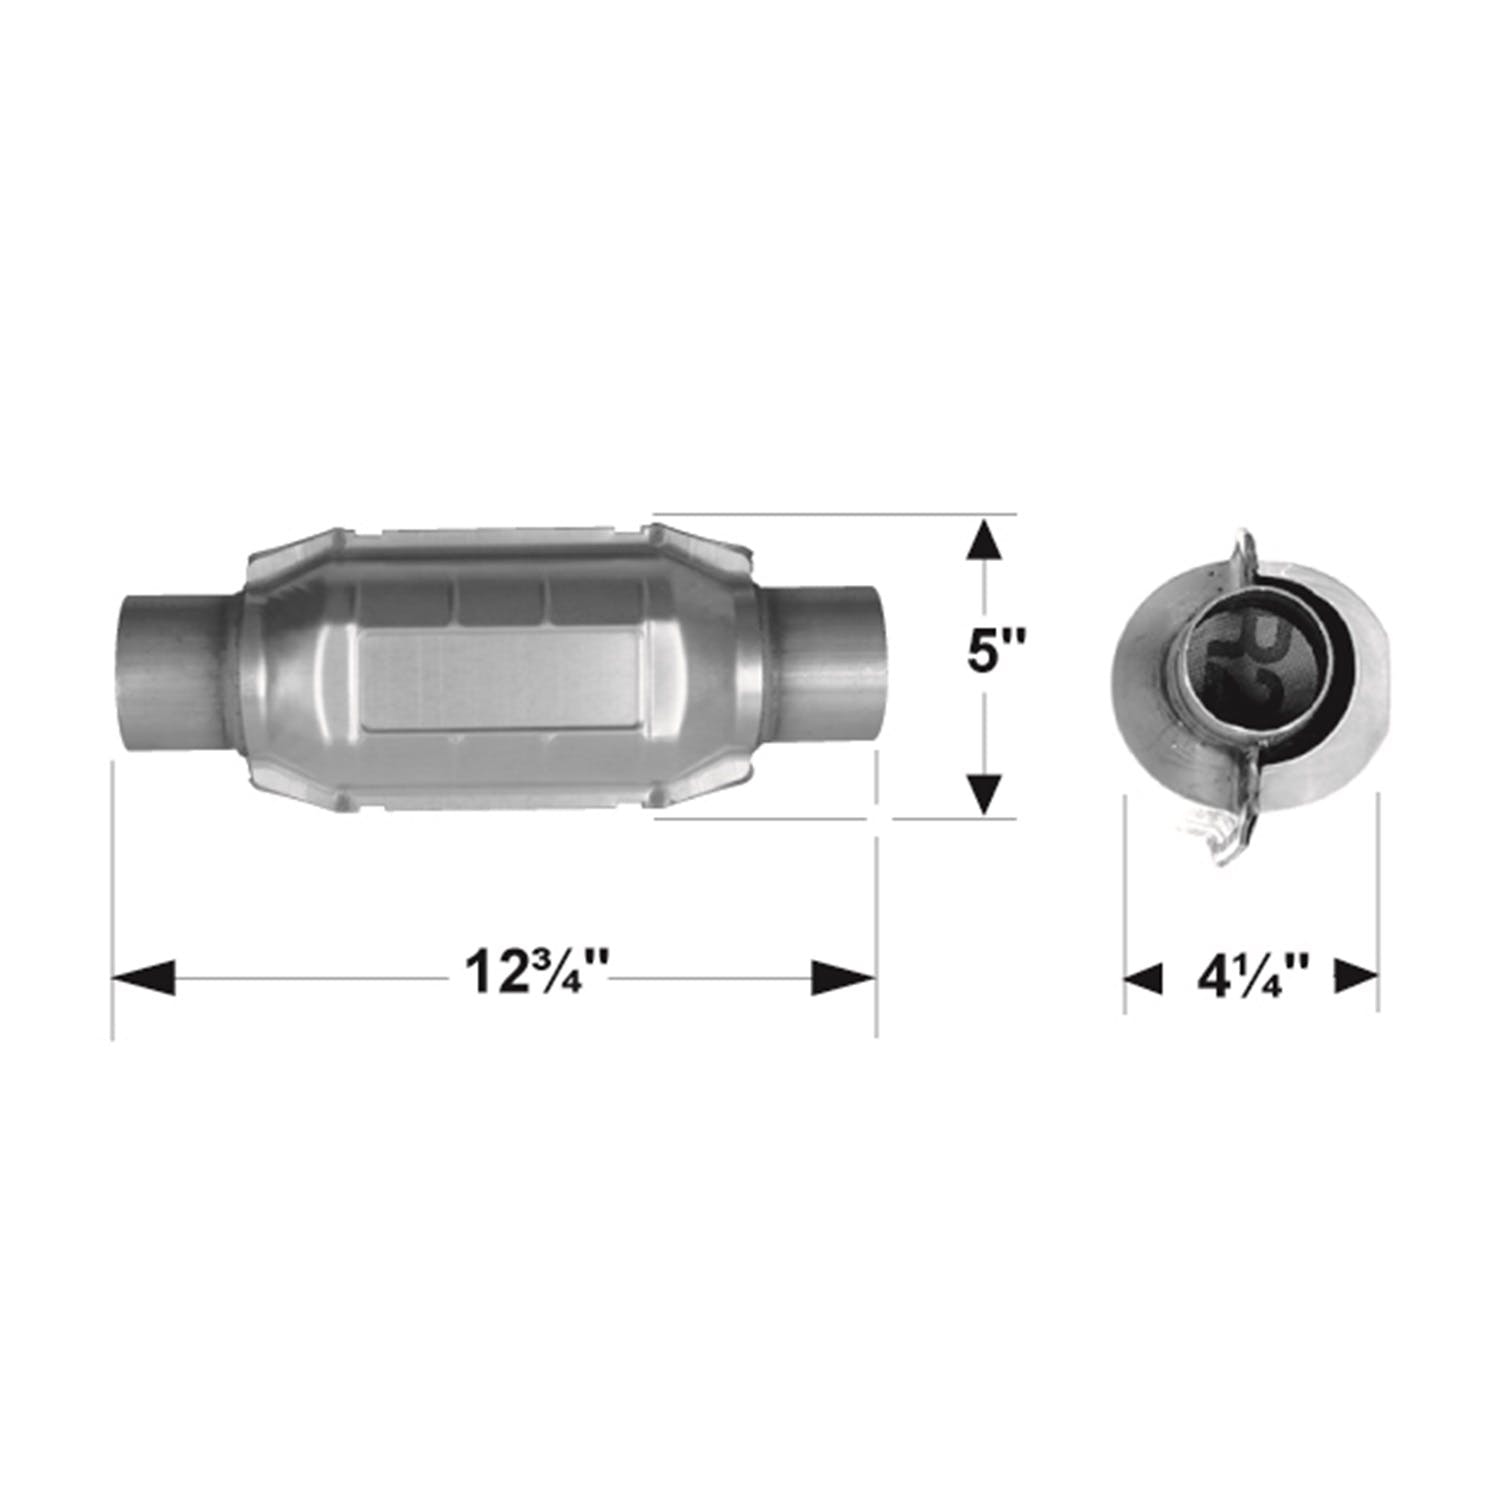 Flowmaster Catalytic Converters 2220125 Catalytic Converter-Universal-222 Series-2.50 in. Inlet/Outlet-49 State